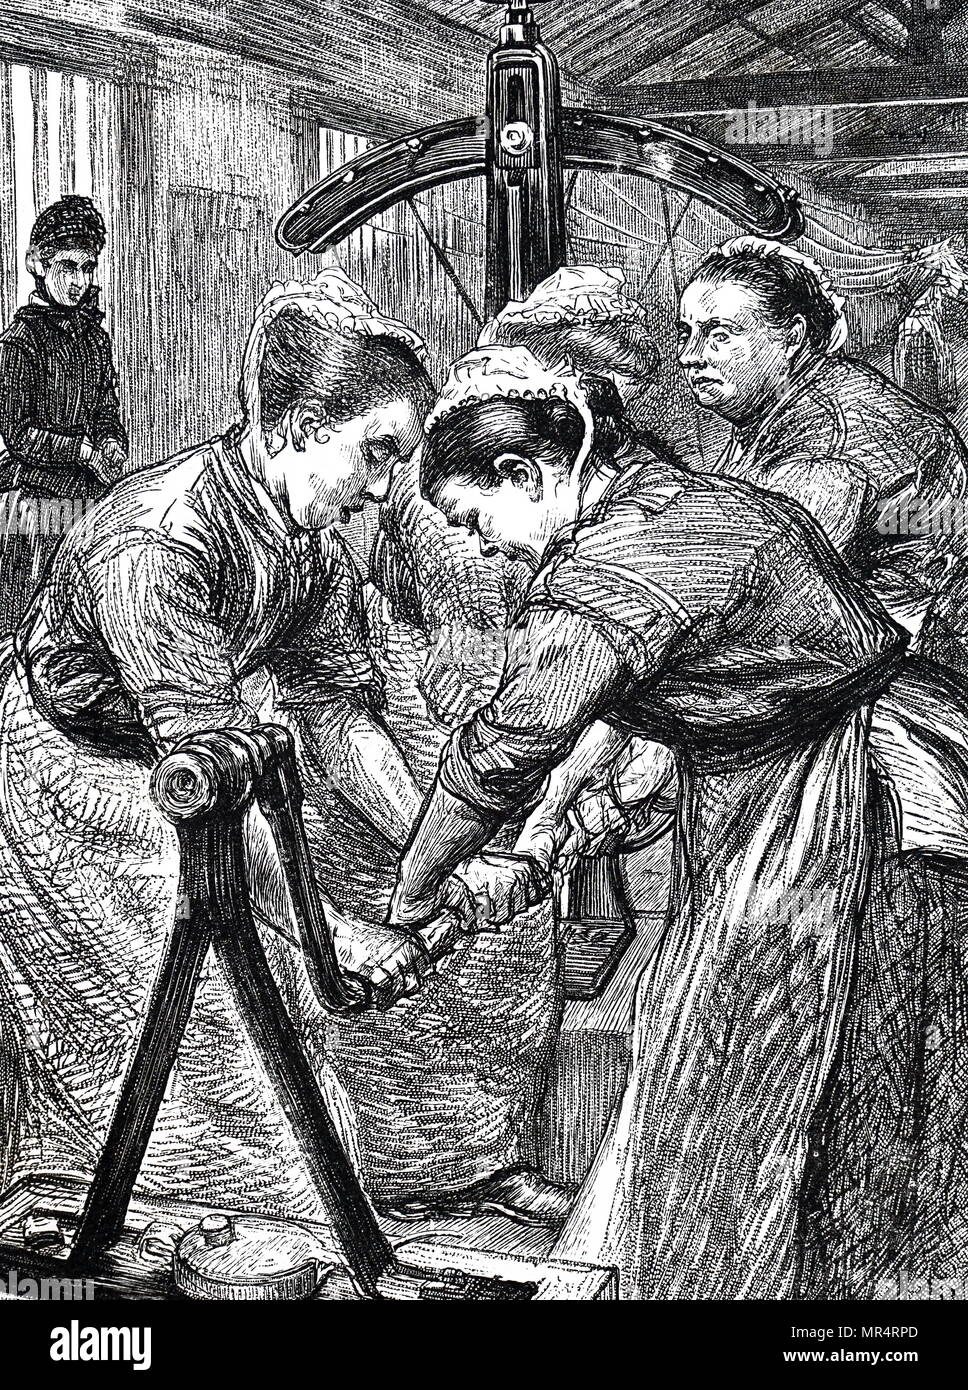 engraving depicting female prisoners working in the laundry room of the fulham refuge dated 19th century MR4RPD